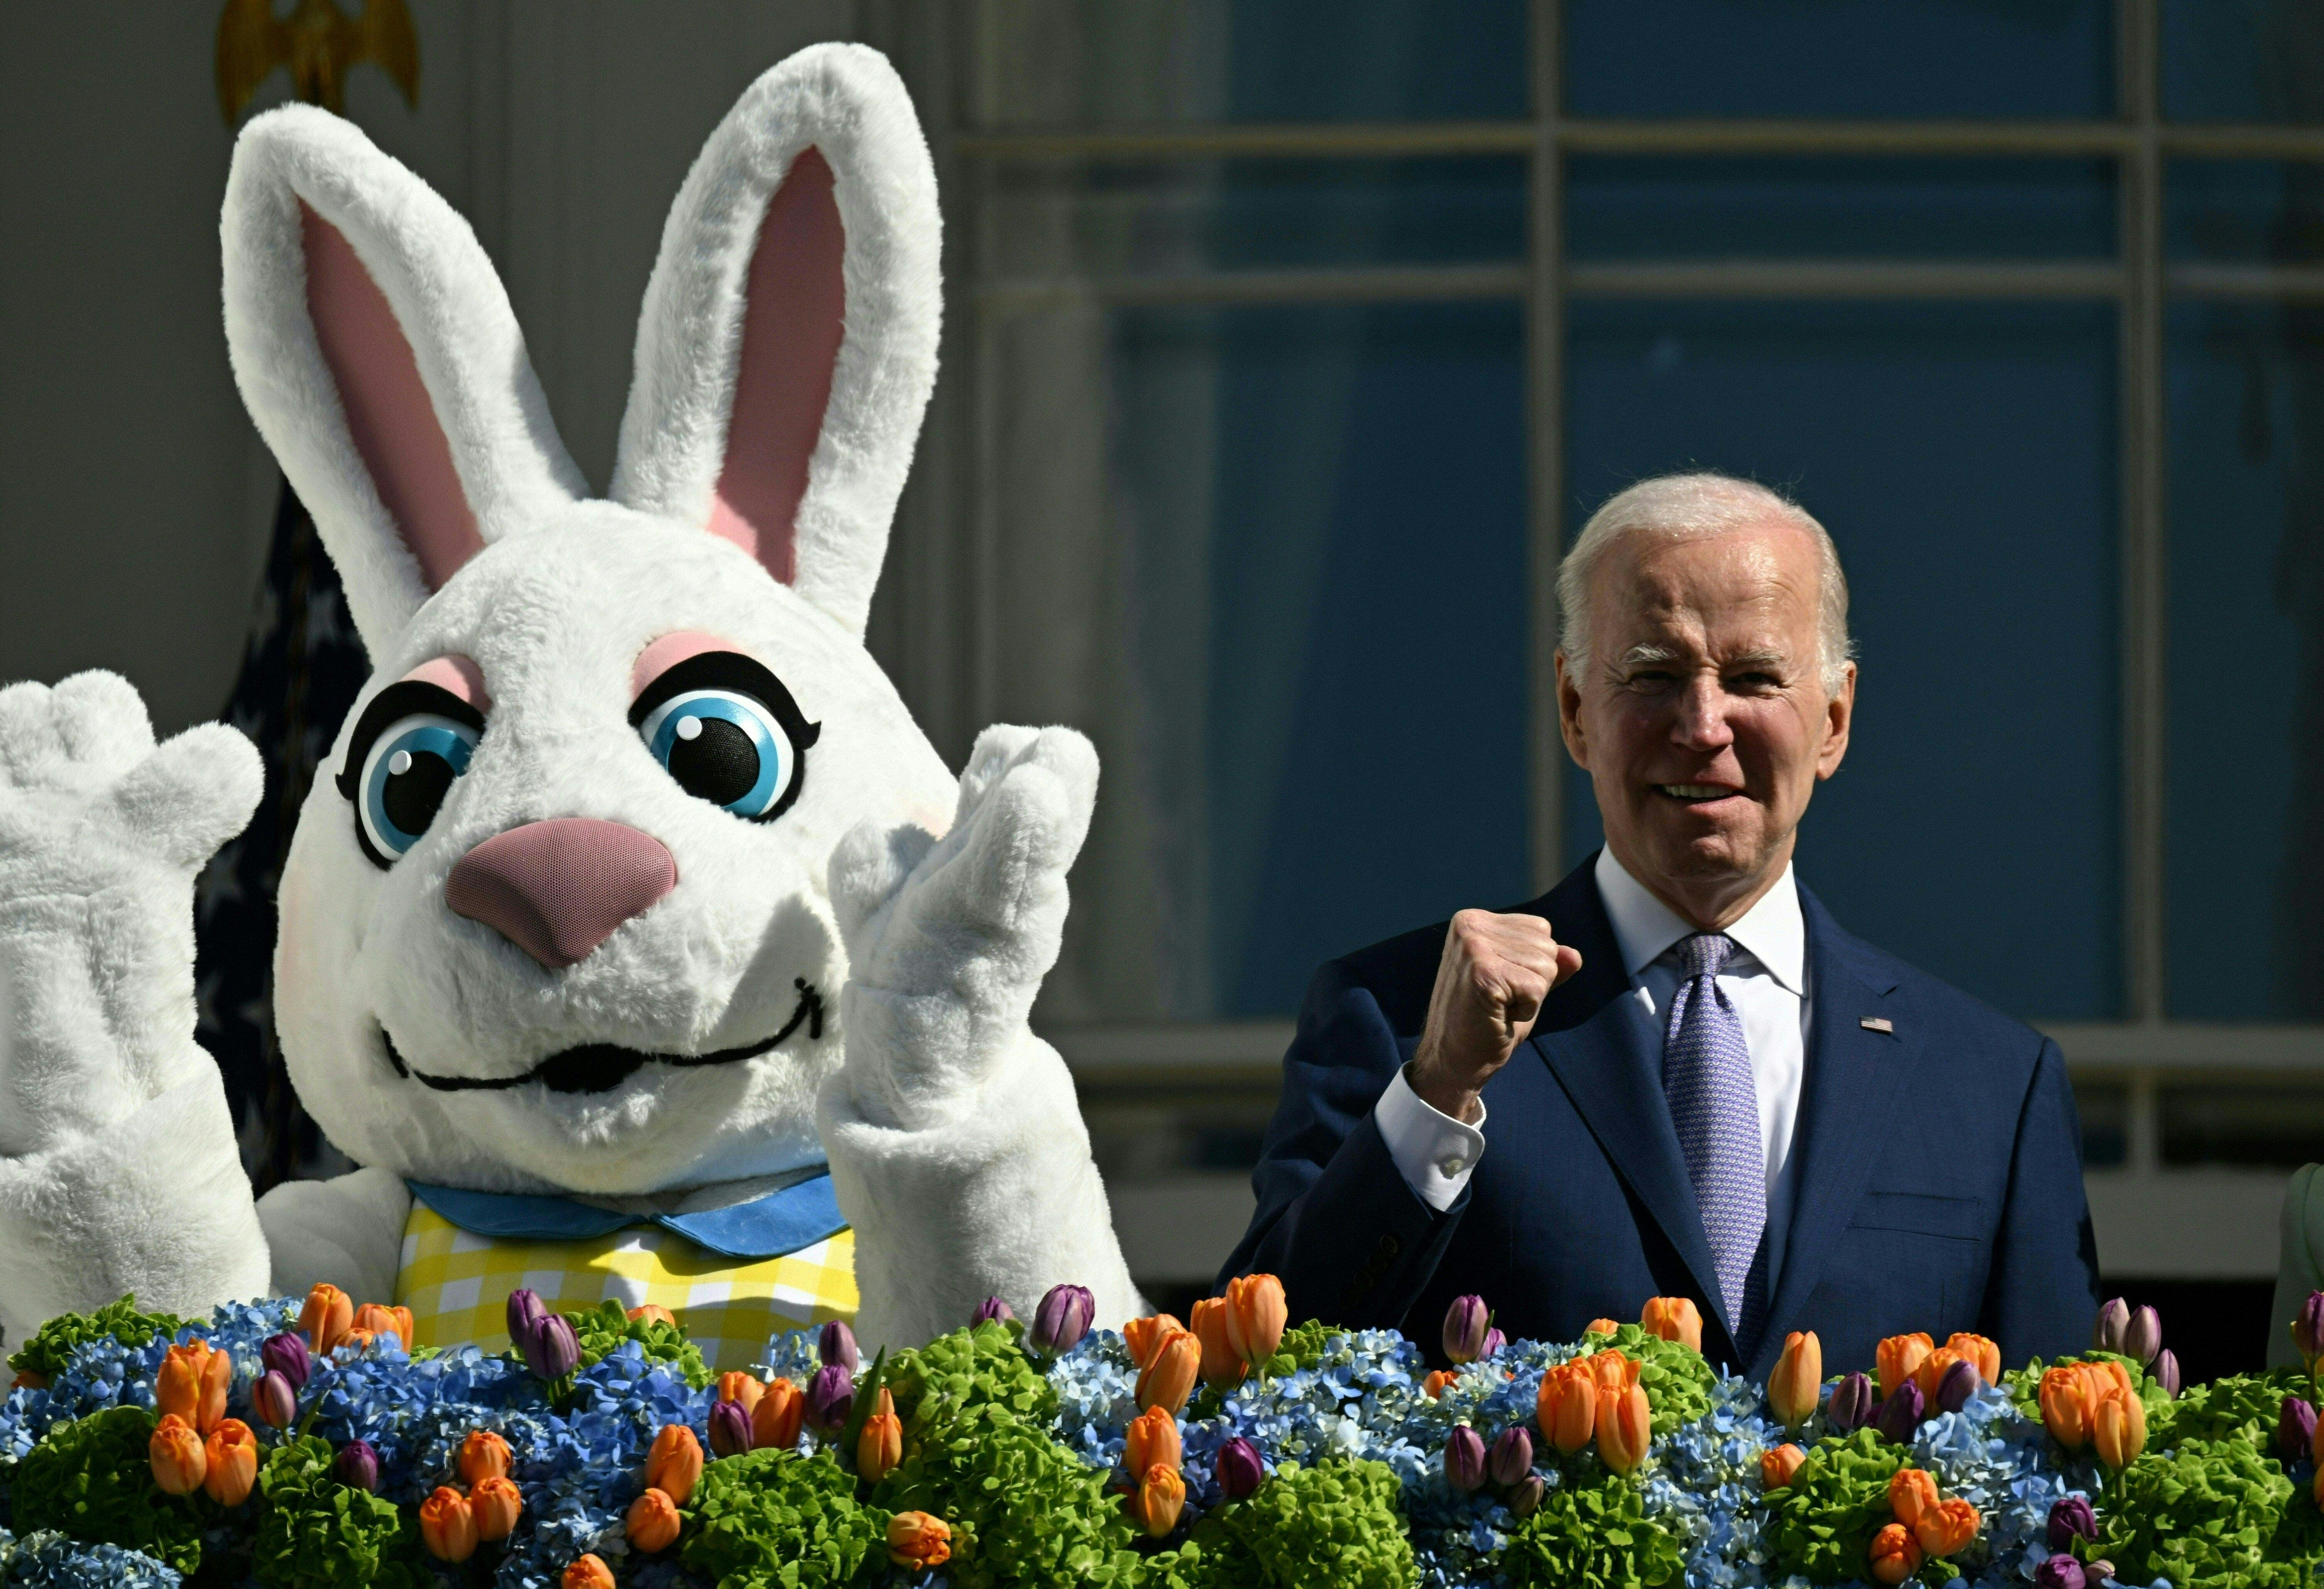 Colbert jokes about whether Biden is 'mentally fit' to run for president again after Easter egg gaffe